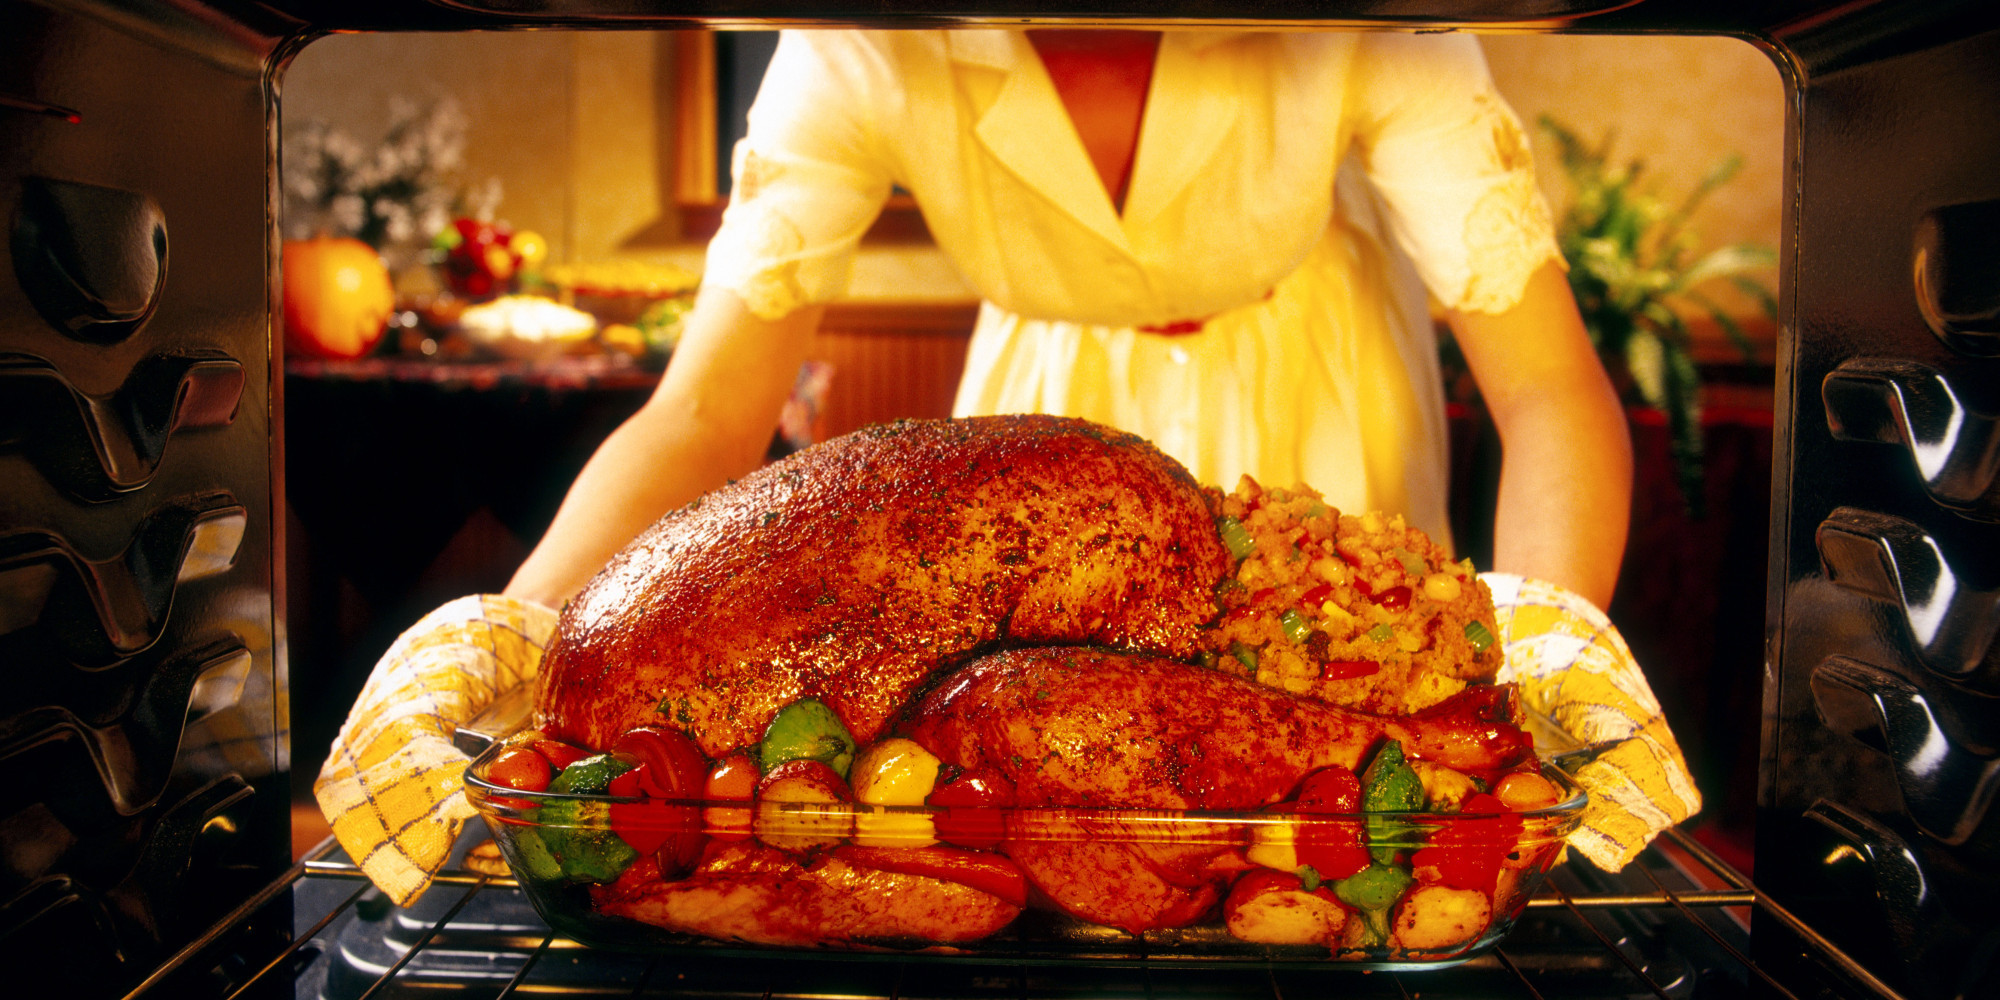 Christmas Dinner Images
 mon Christmas Dinner Mistakes And How To Avoid Them